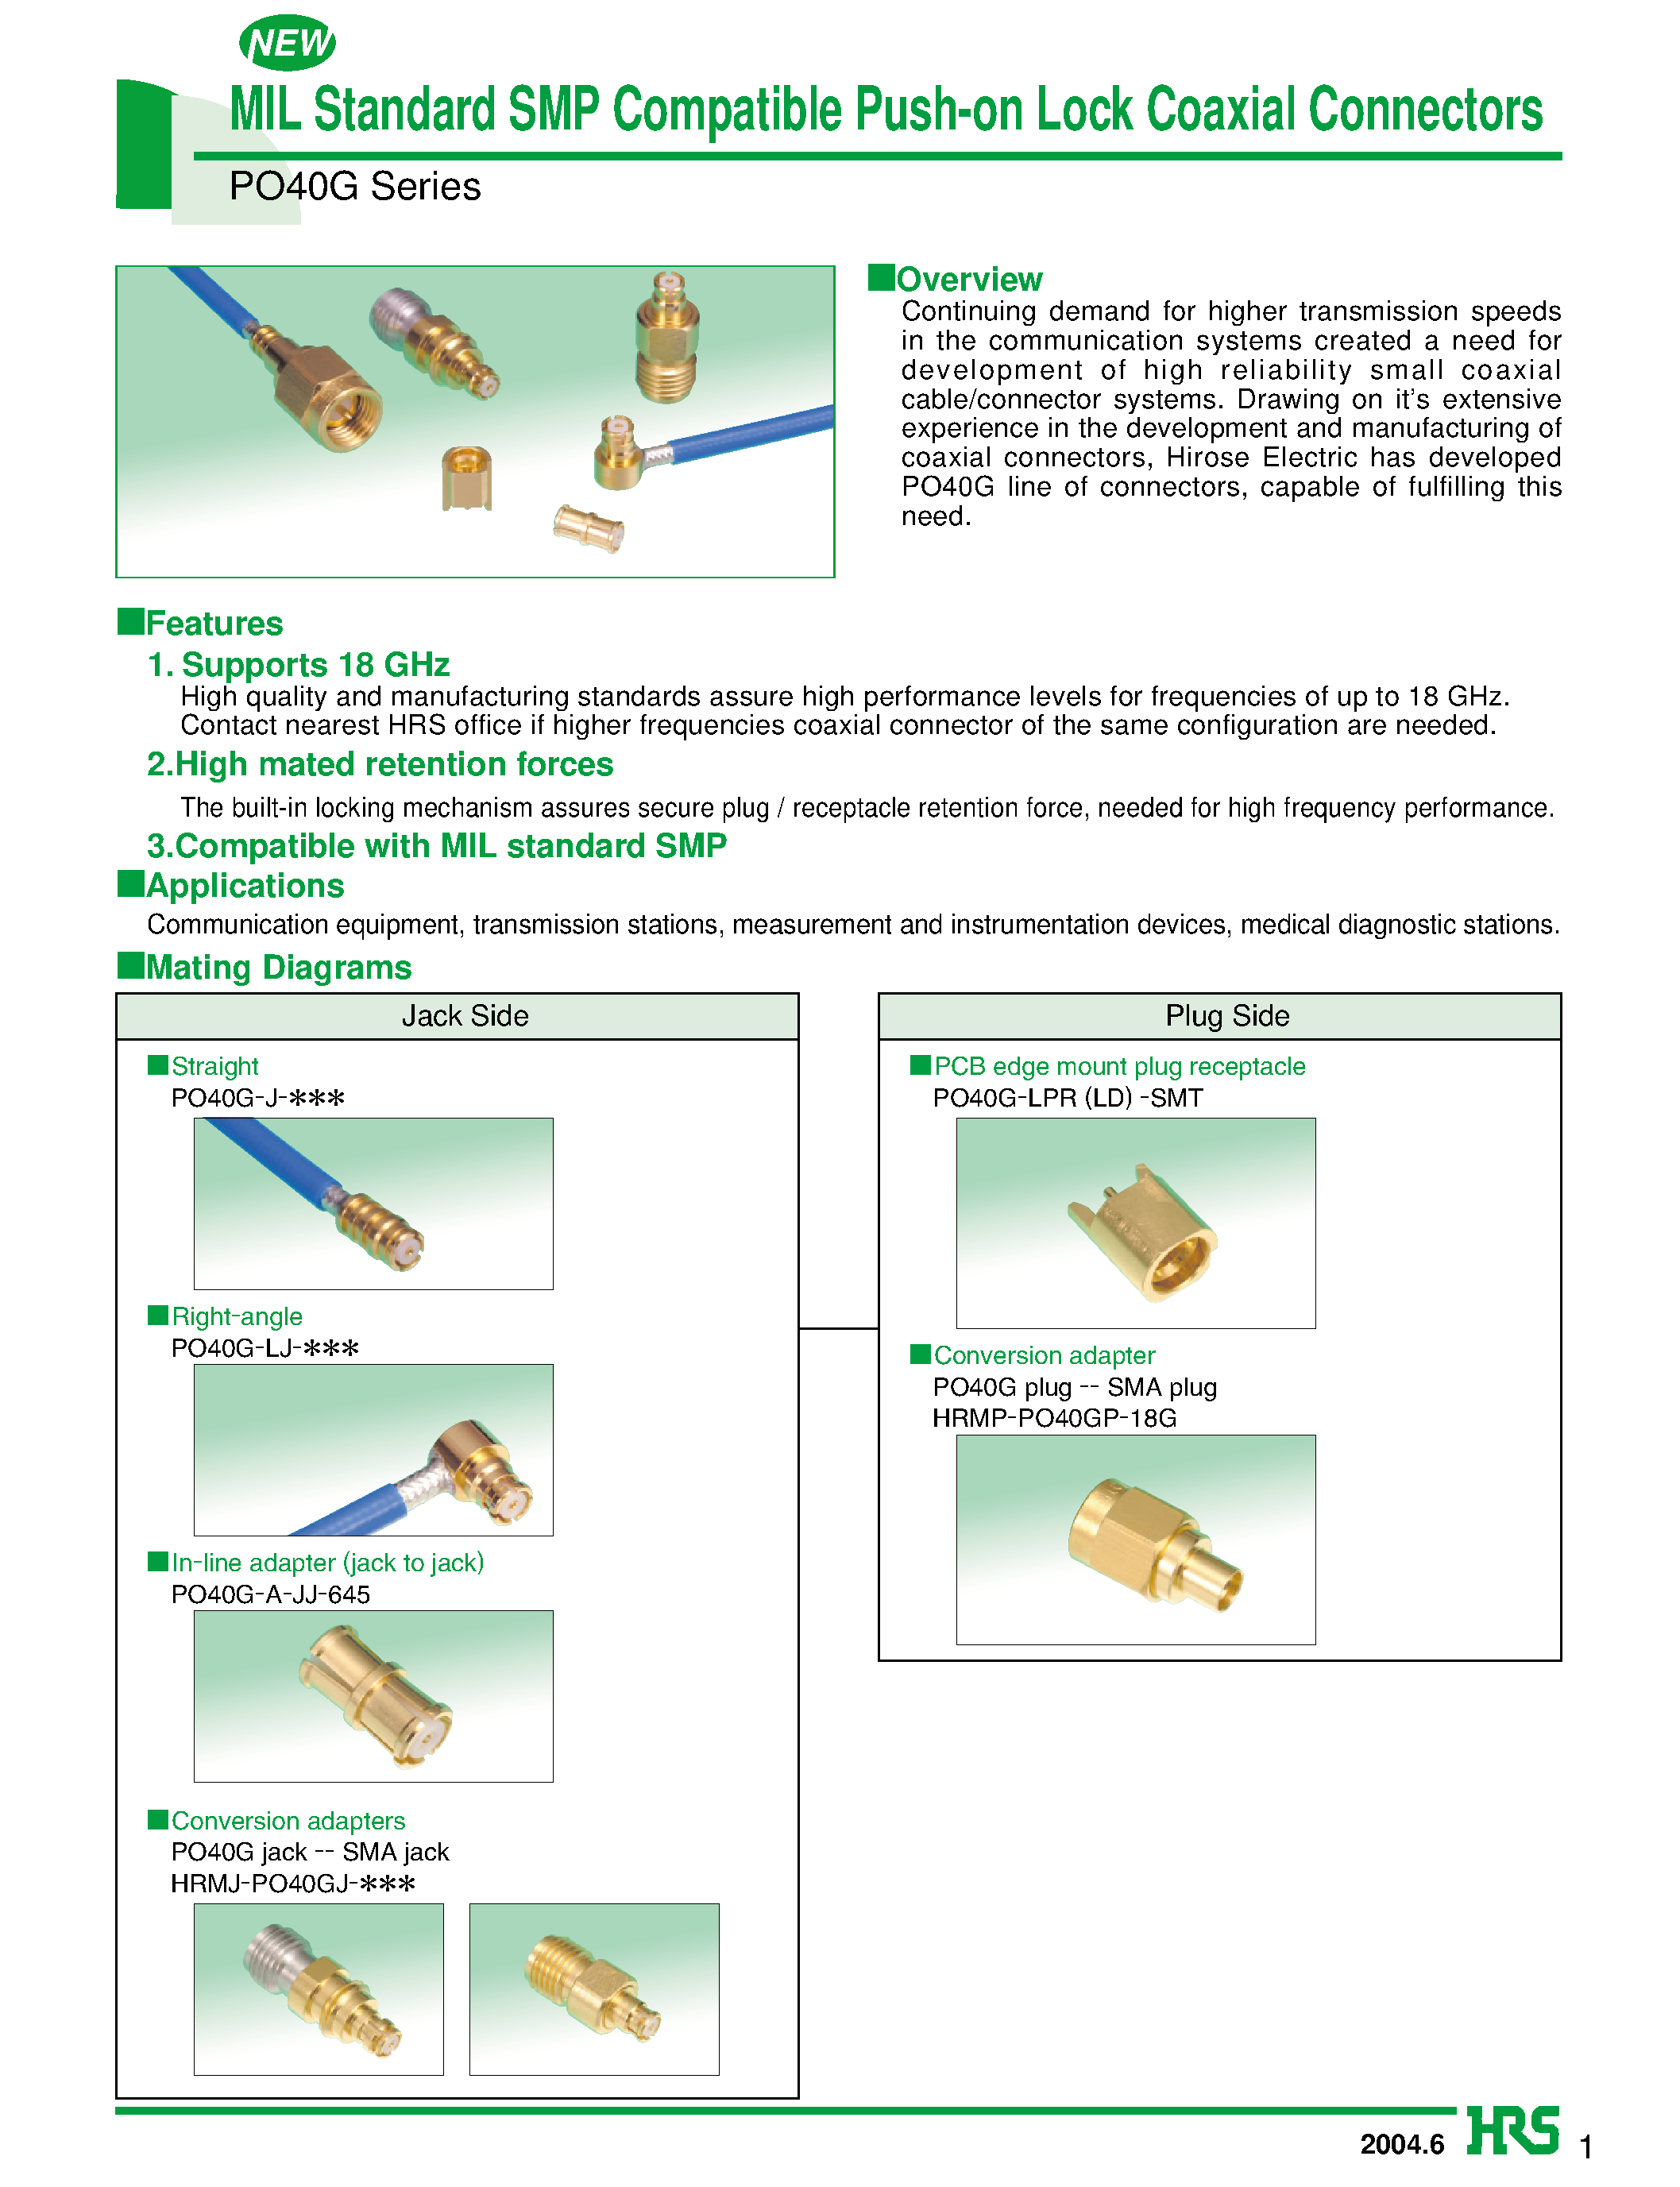 Datasheet PO40G-J-N2 - MIL Standard SMP Compatible Push-on Lock Coaxial Connectors page 1